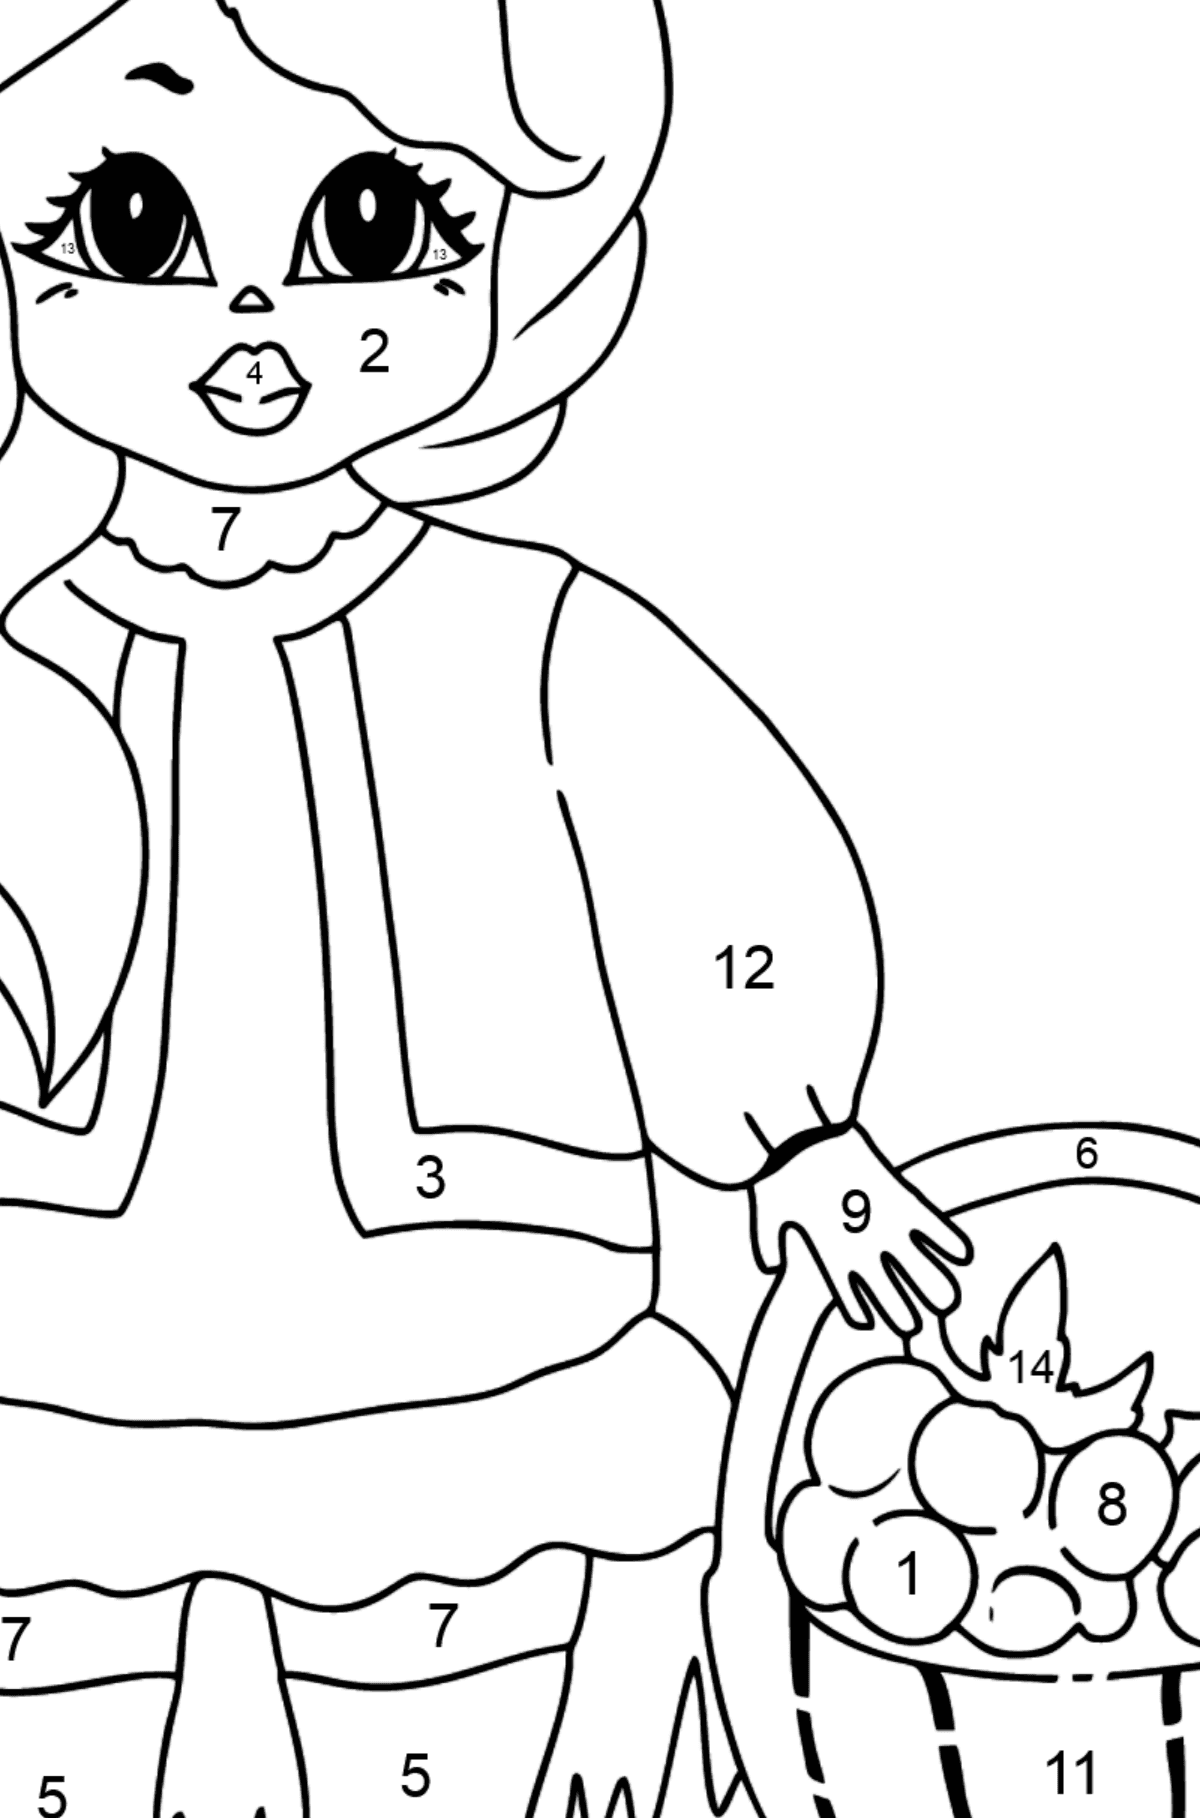 Coloring Page - A Princess with a Basket - Coloring by Numbers for Kids